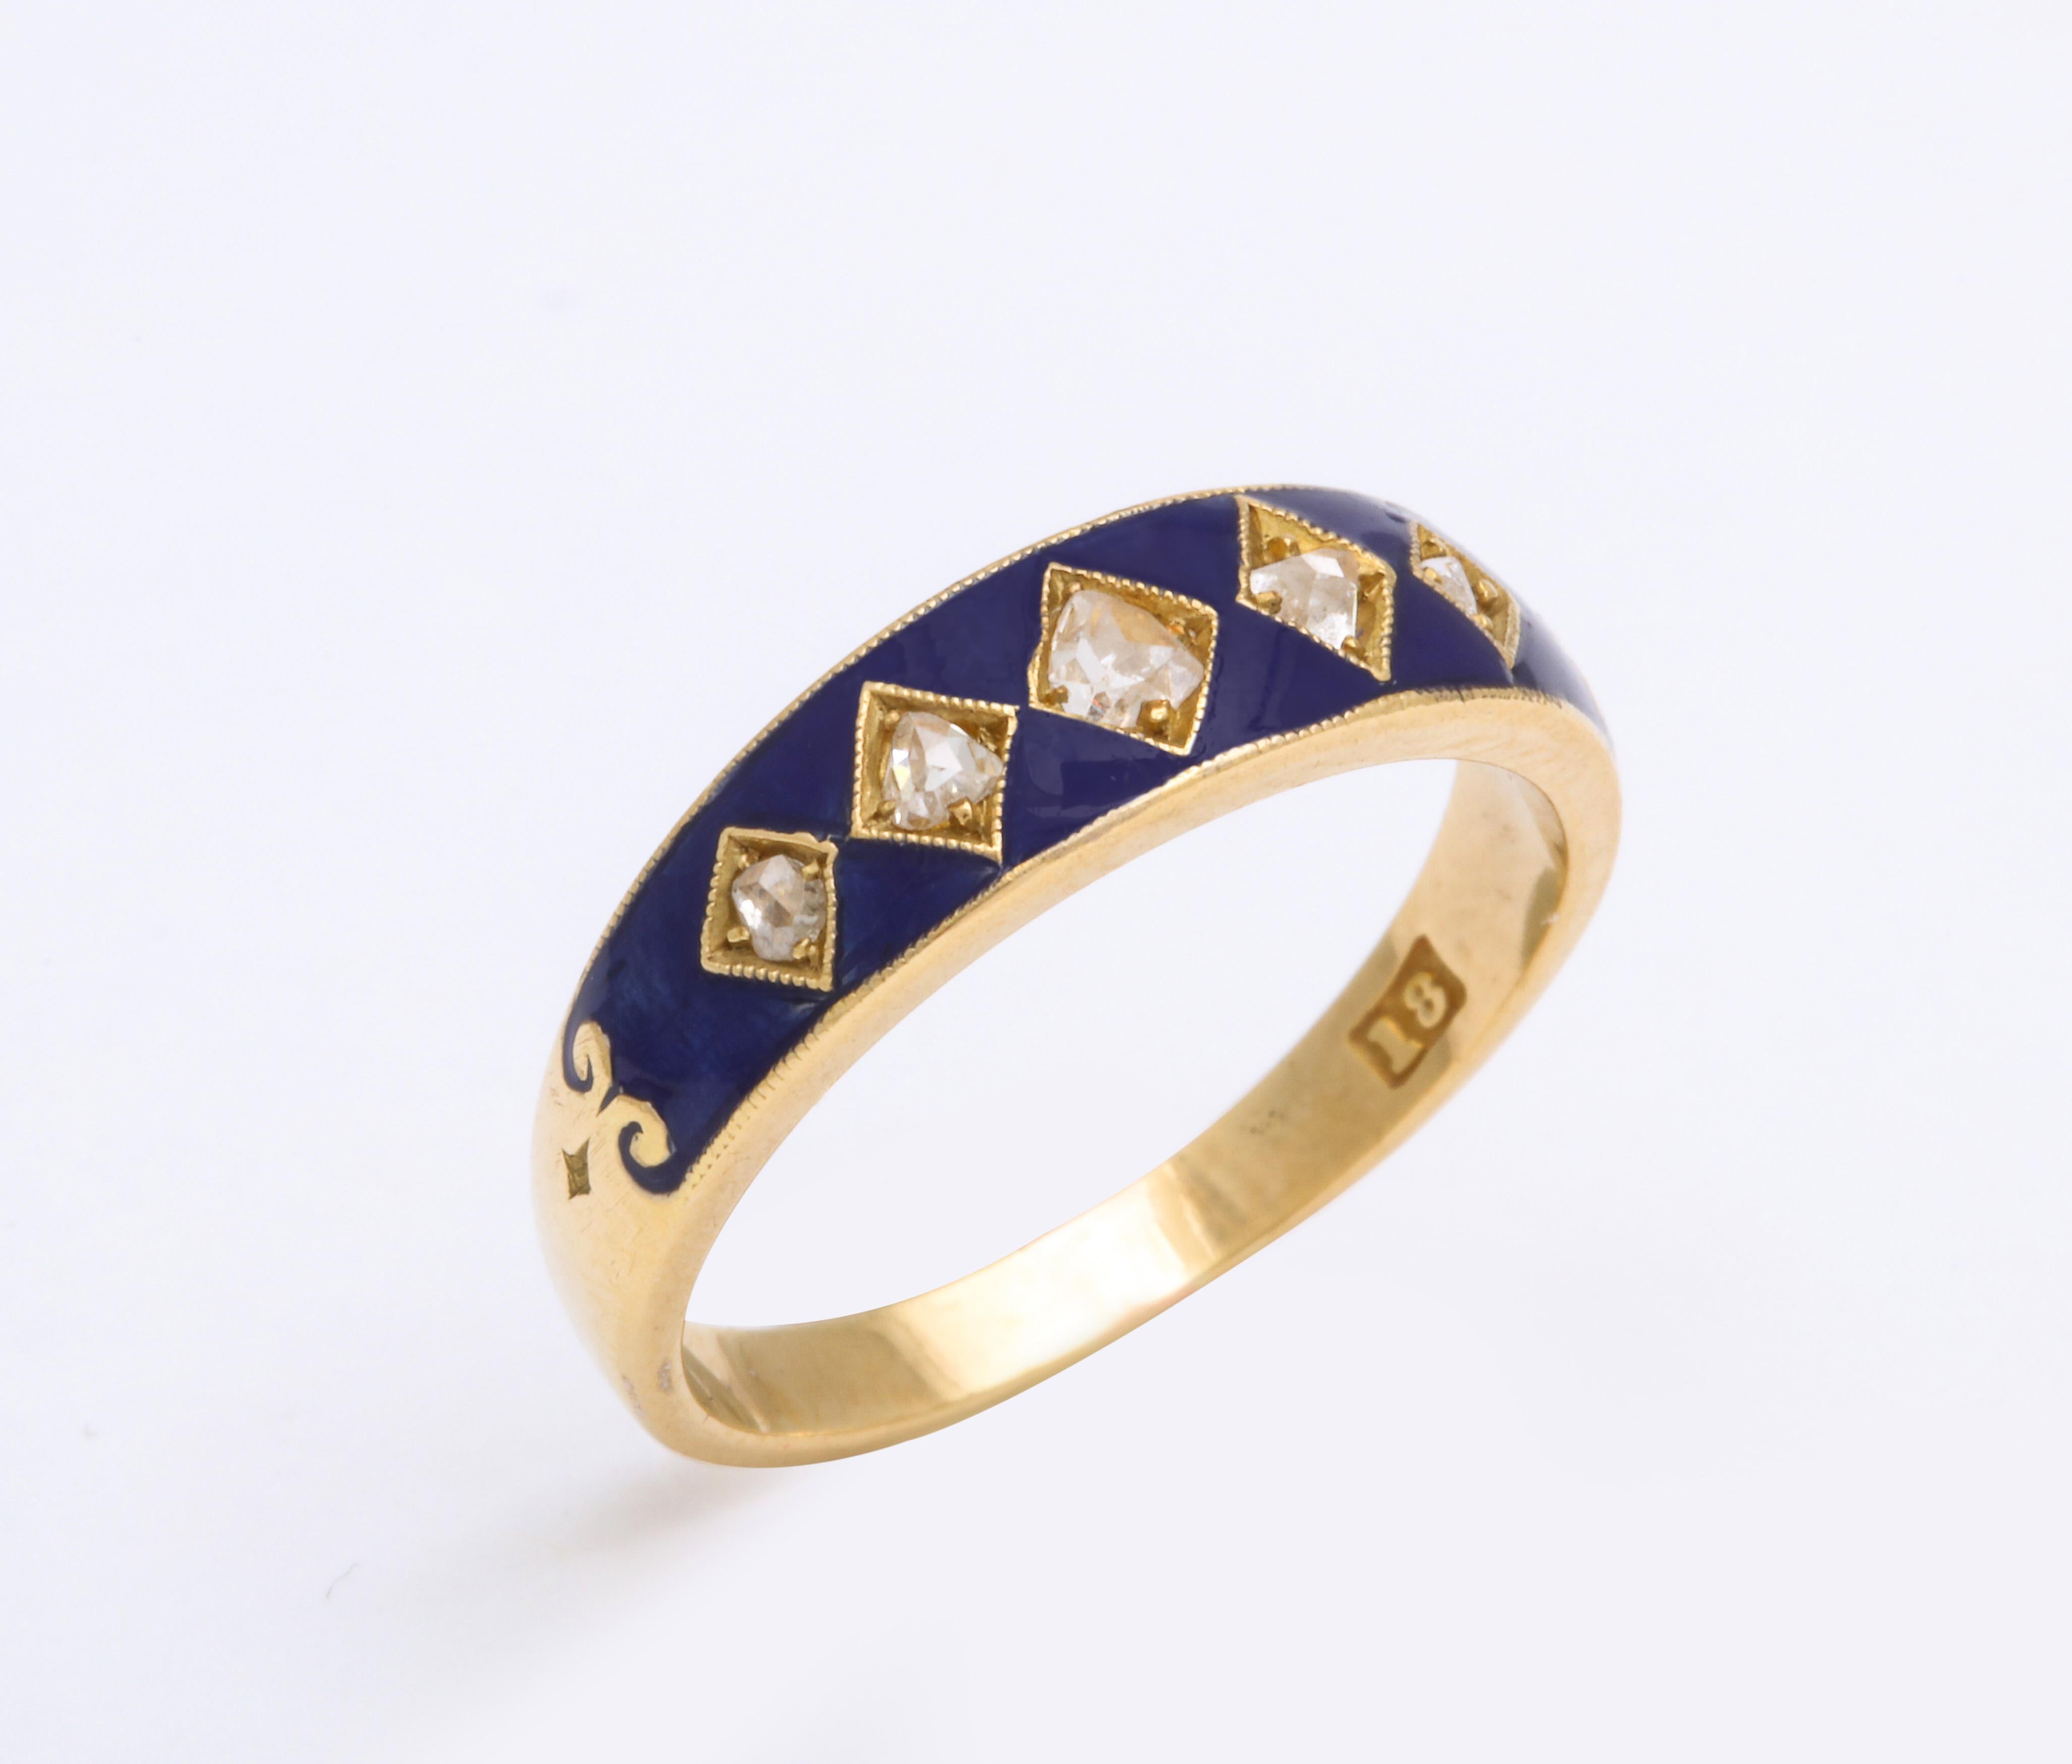 From the late 19th century, the top decorated in vibrant deep cobalt blue enamel enhanced with five graduated rose diamonds, set in lozenge-shaped bezels, mounted in 18k yellow gold. 

English, circa 1890, stamped 18.

Size 6 ½. Width of band: ¼ in.